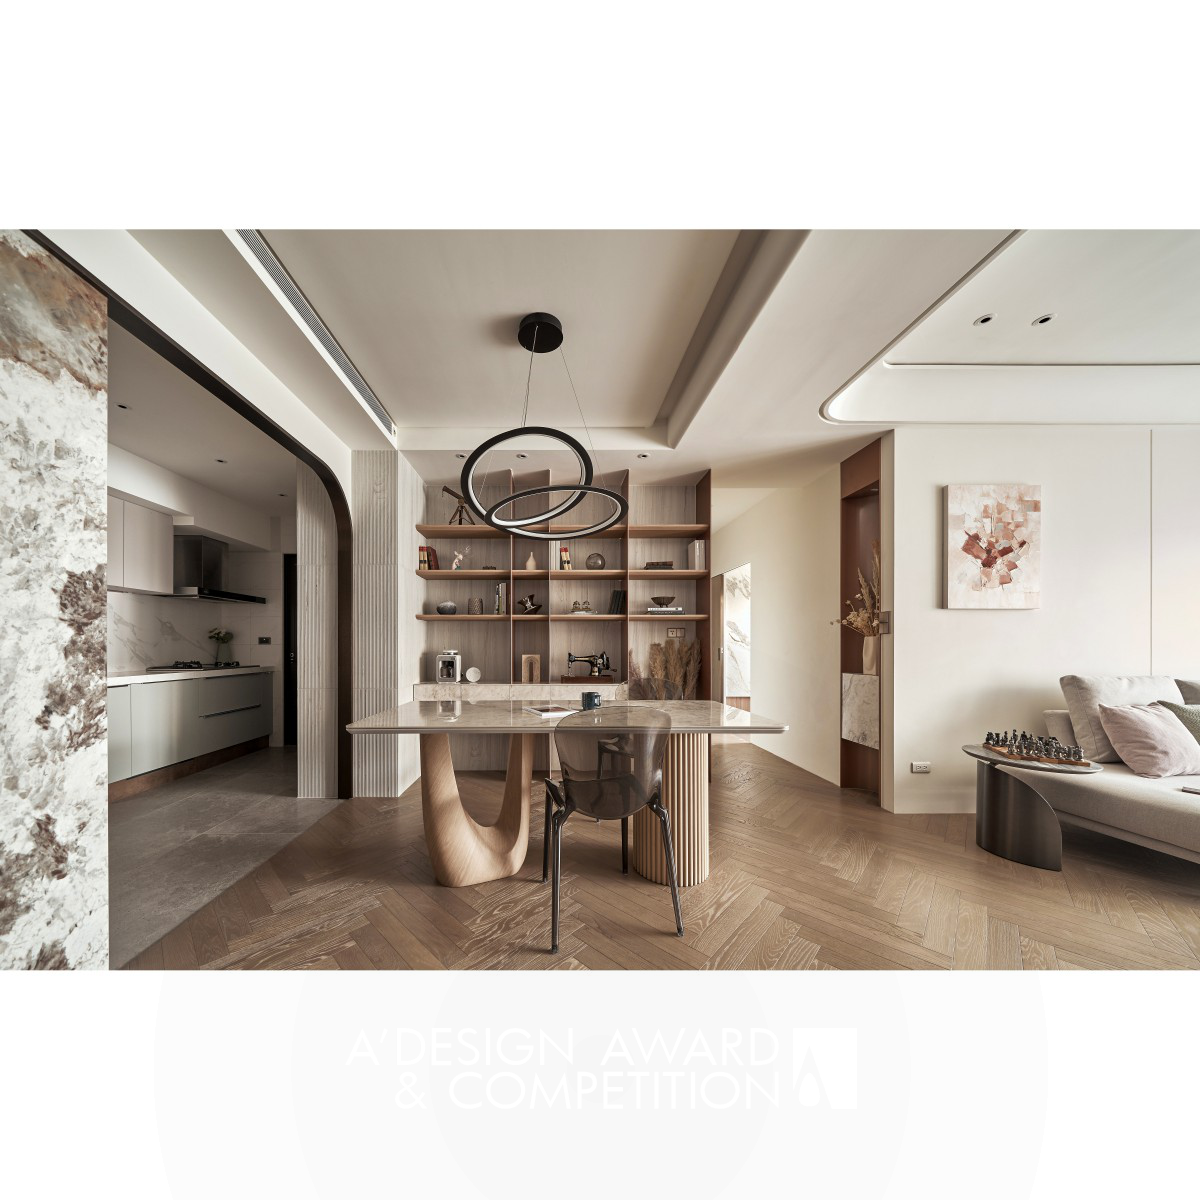 C'est La Vie Residential House by Yi Chun Chung Bronze Interior Space and Exhibition Design Award Winner 2024 